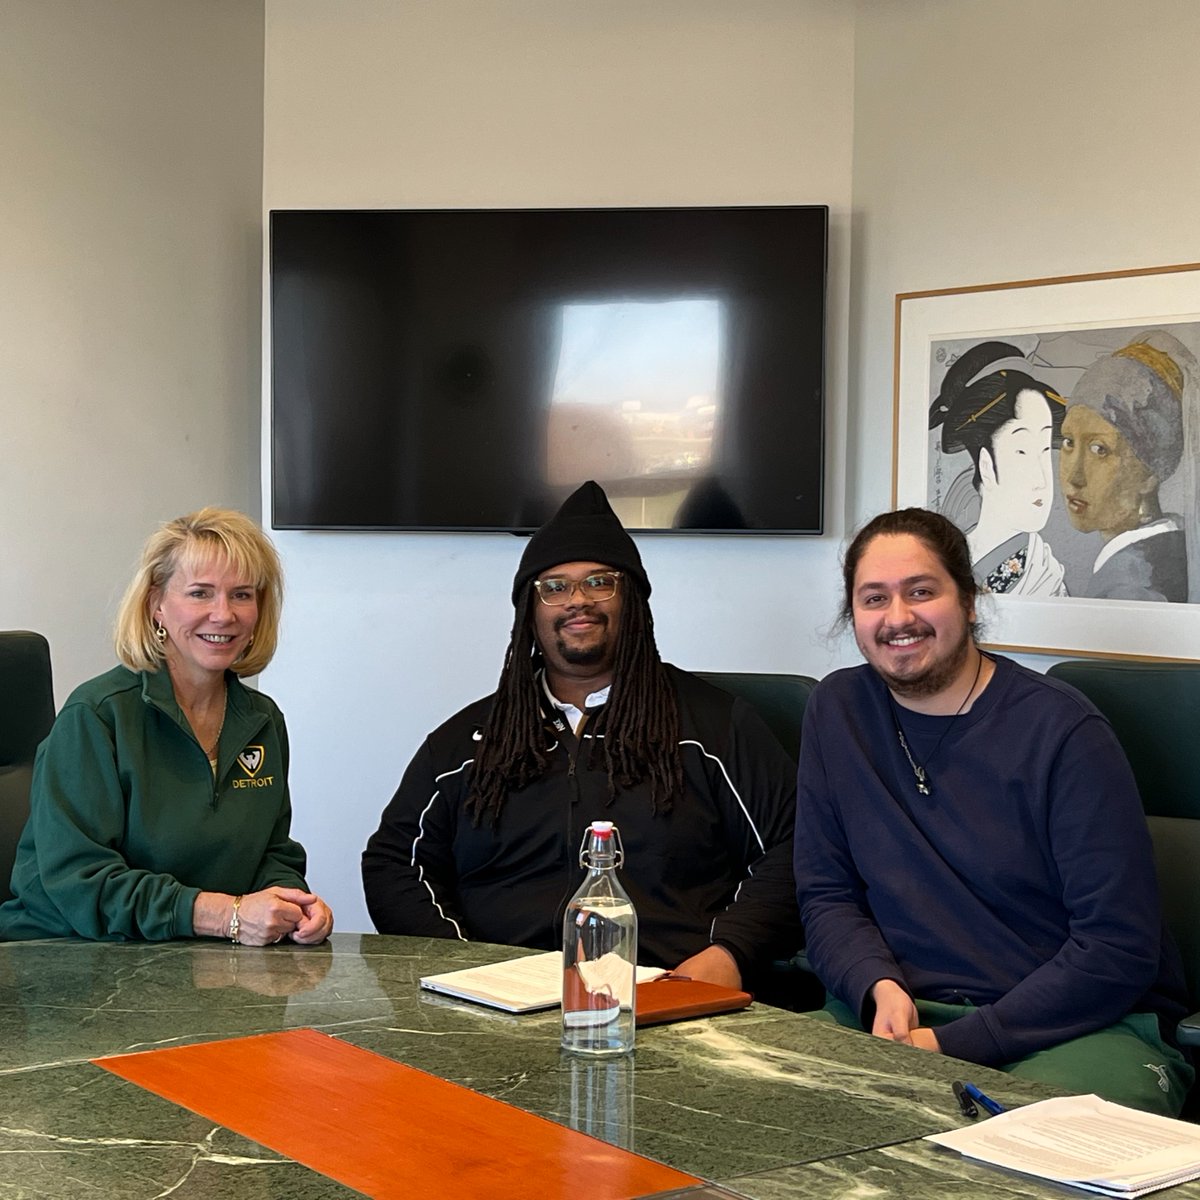 Thank you to Nakim Edmond and Yoel Gonzalez, two MA Anthropology students, and their mentor, Dr. Yuson Jung for inviting me to be a part of their “College to Career” in action practicum exploring the Black Tech Ecosystem in Detroit.